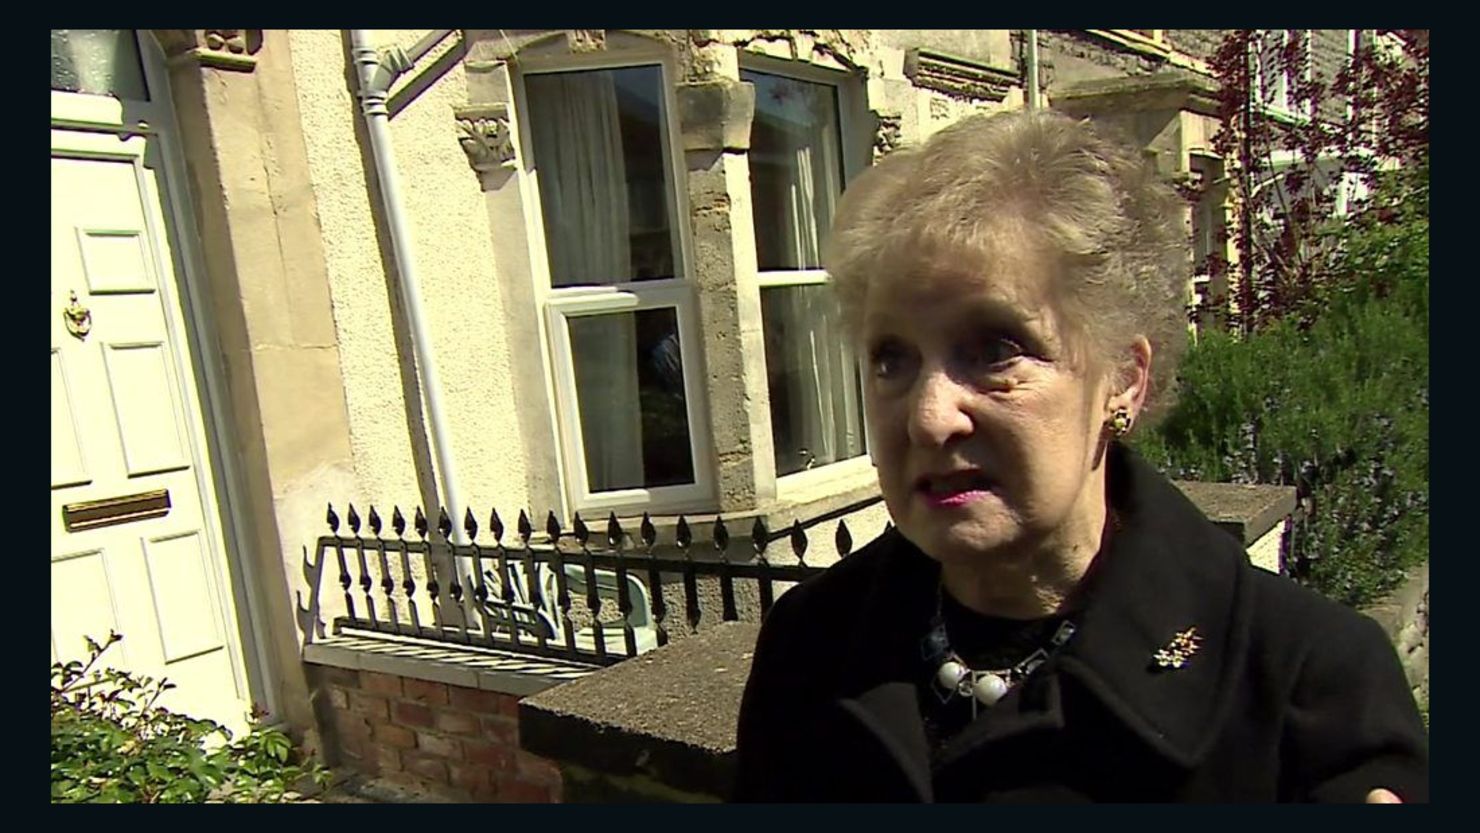 Brenda from Bristol is not looking forward to the prospect of another election